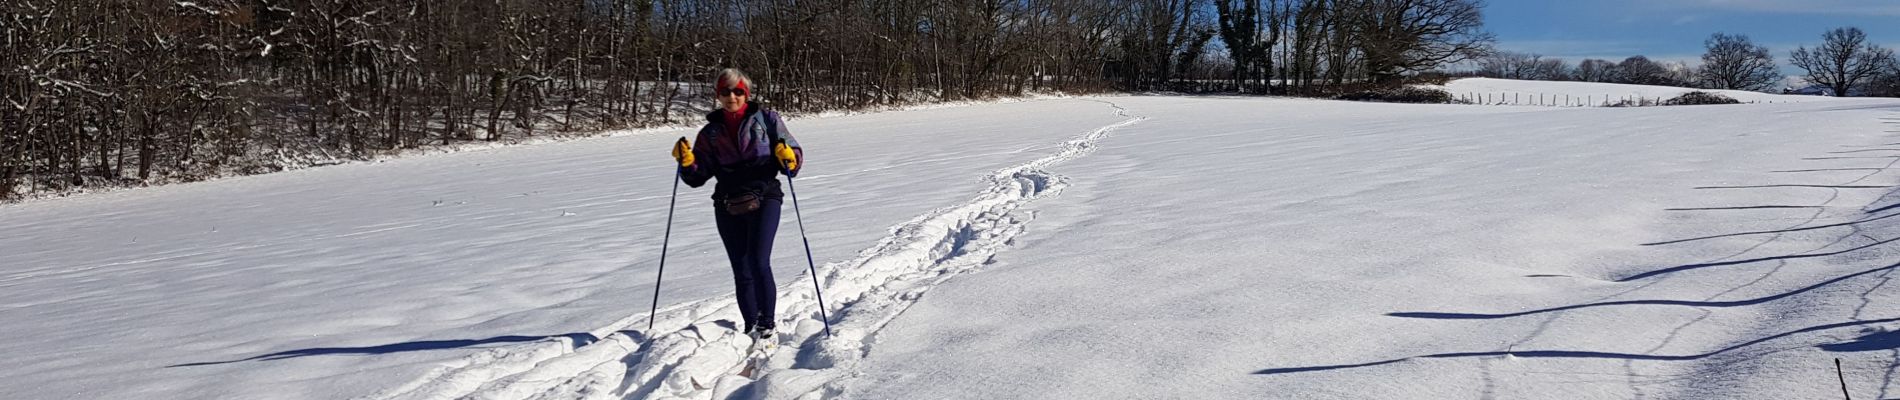 Trail Cross-country skiing Gex - mont mourex - Photo